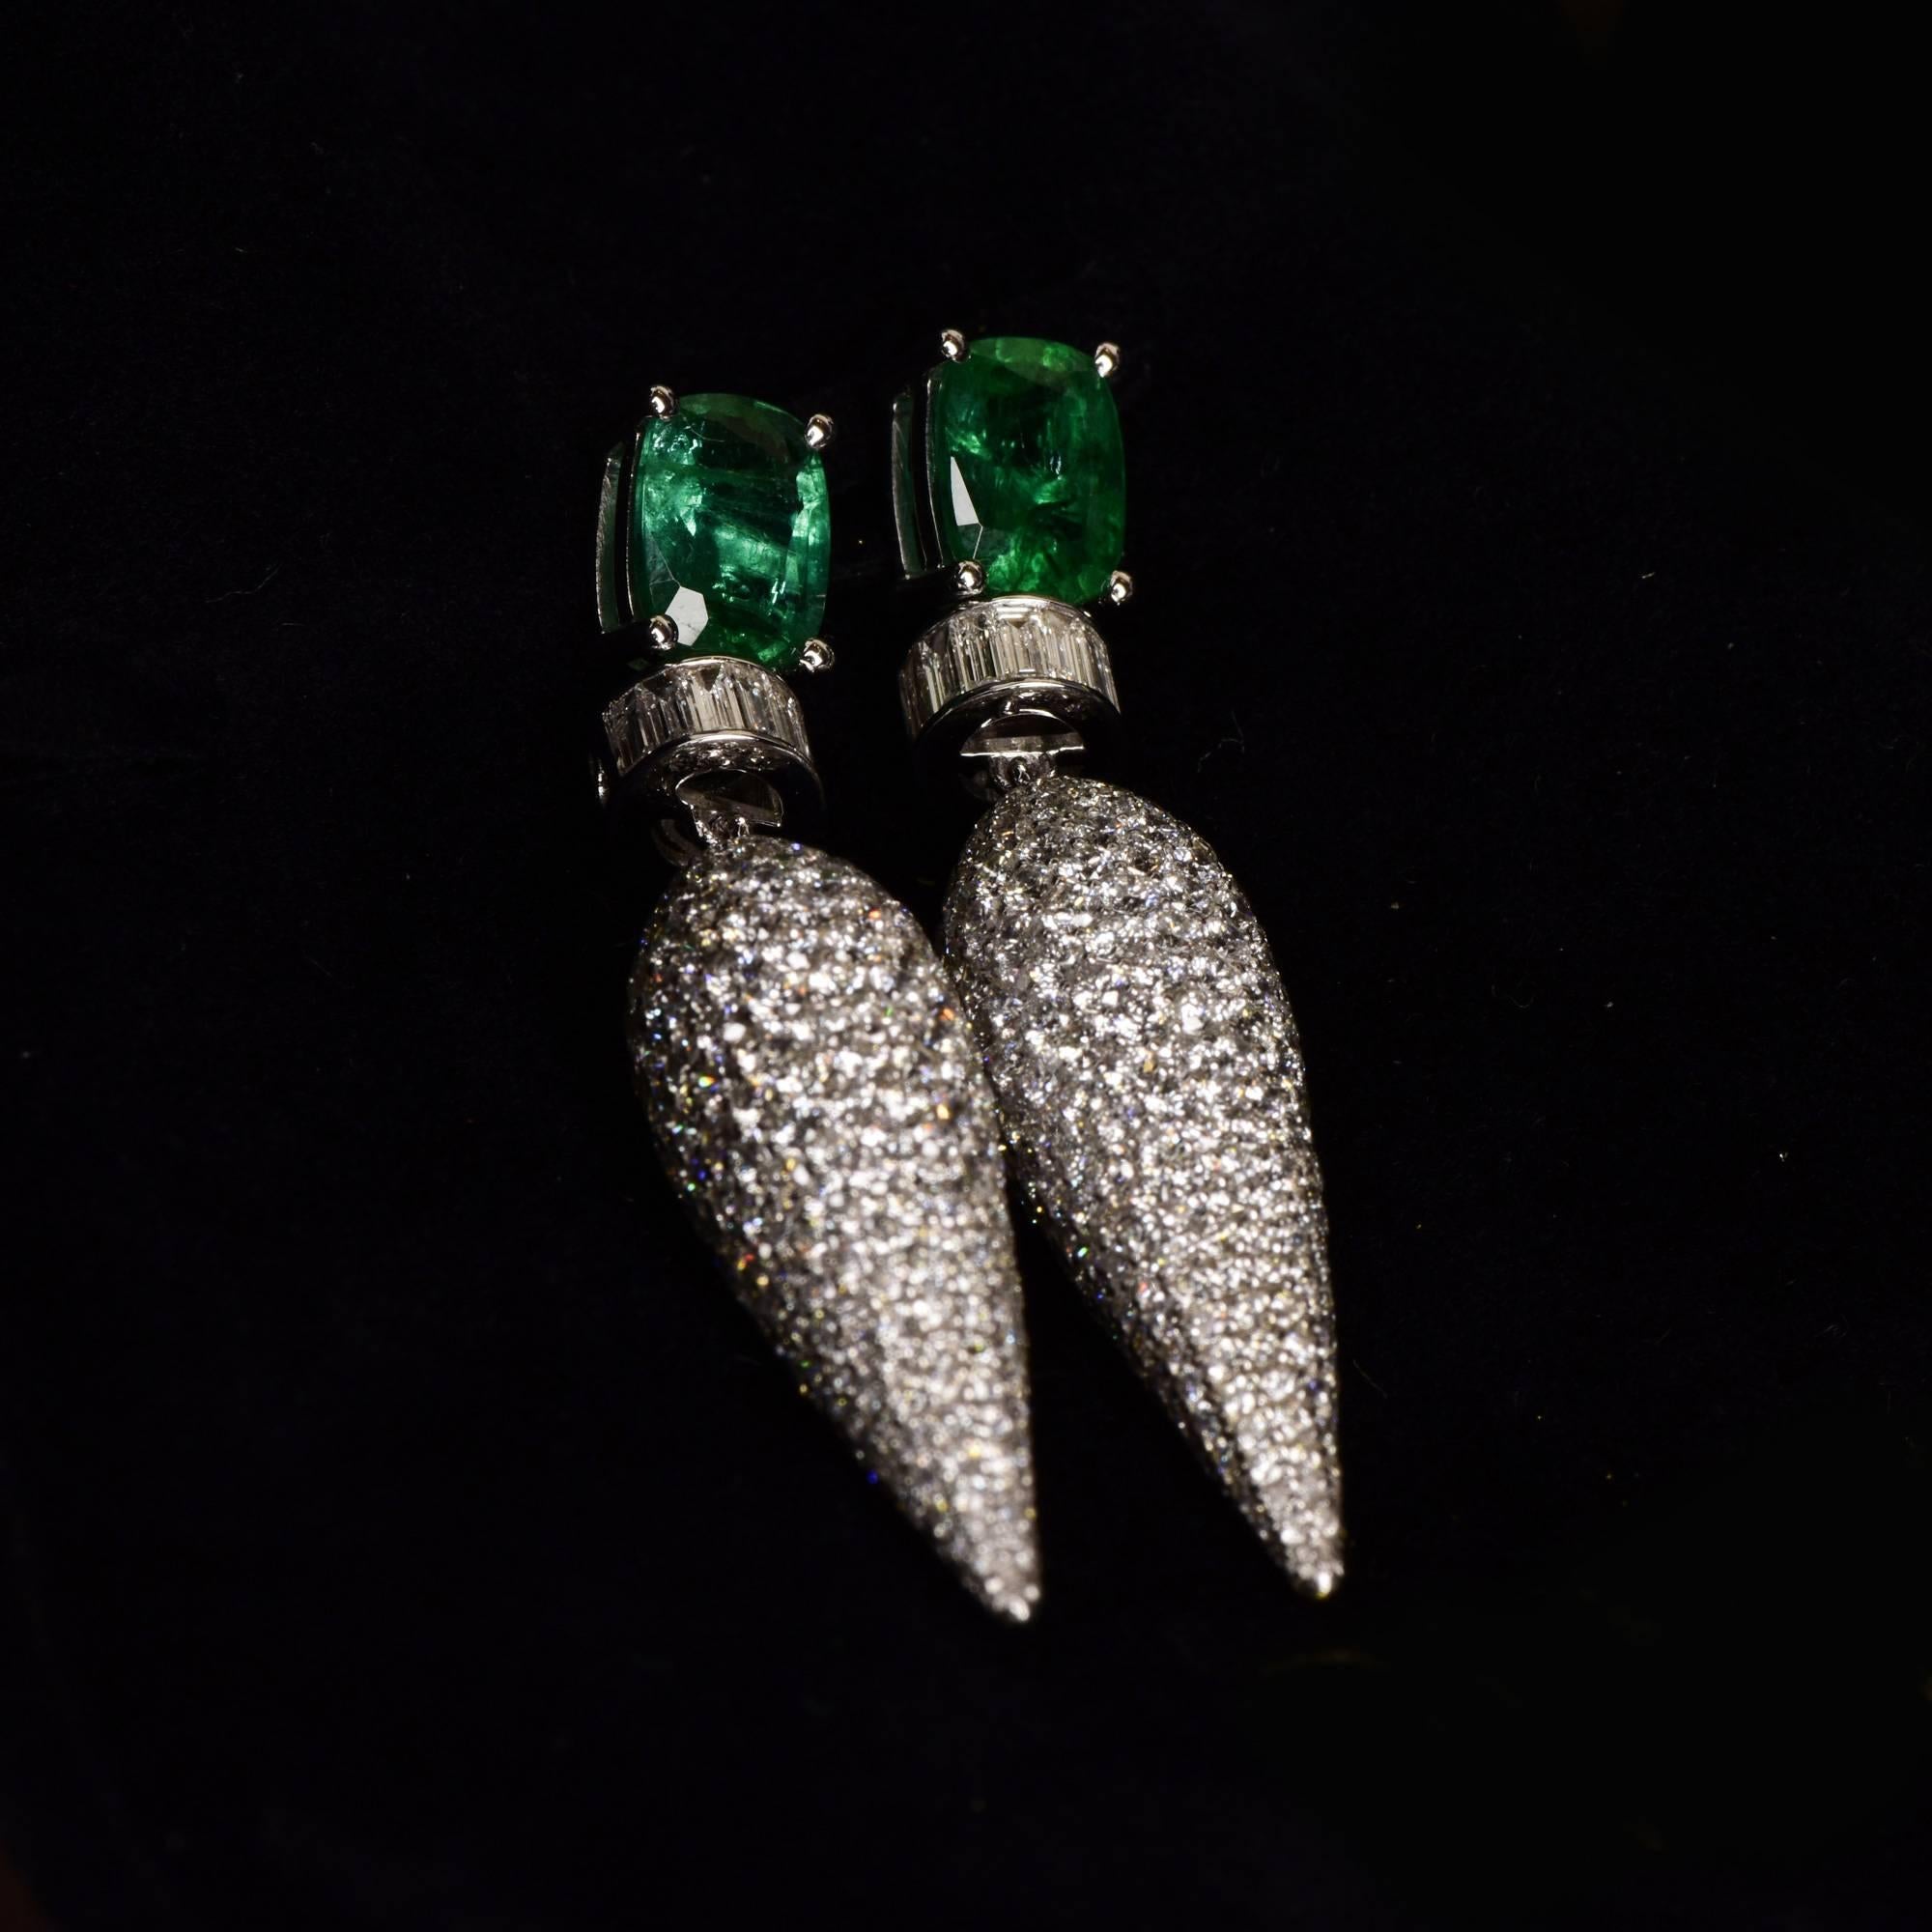 Icicle motif dangler earrings with unenhanced emerald and round brilliant diamonds. This dramatic earring features an icicle of pave diamonds hanging from the ear that dazzles with its stunning play of light. The captivating earrings boldly blend